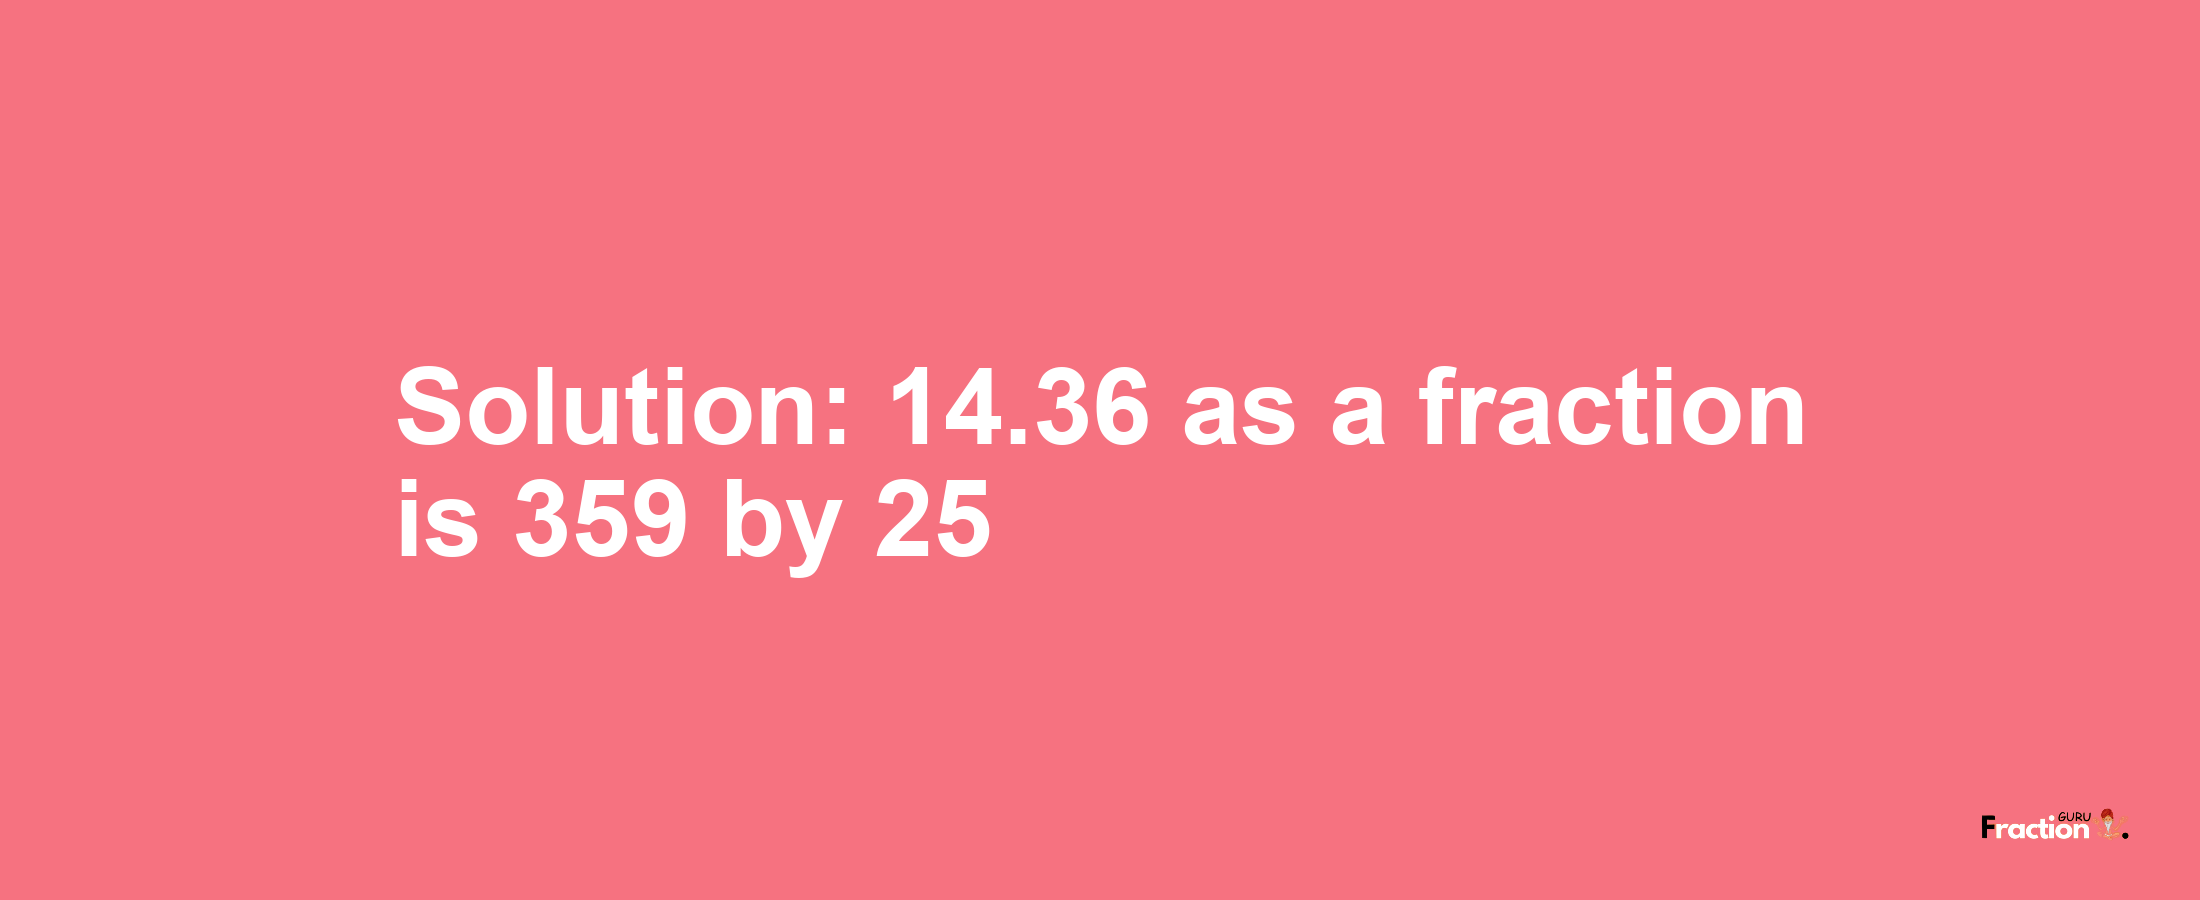 Solution:14.36 as a fraction is 359/25